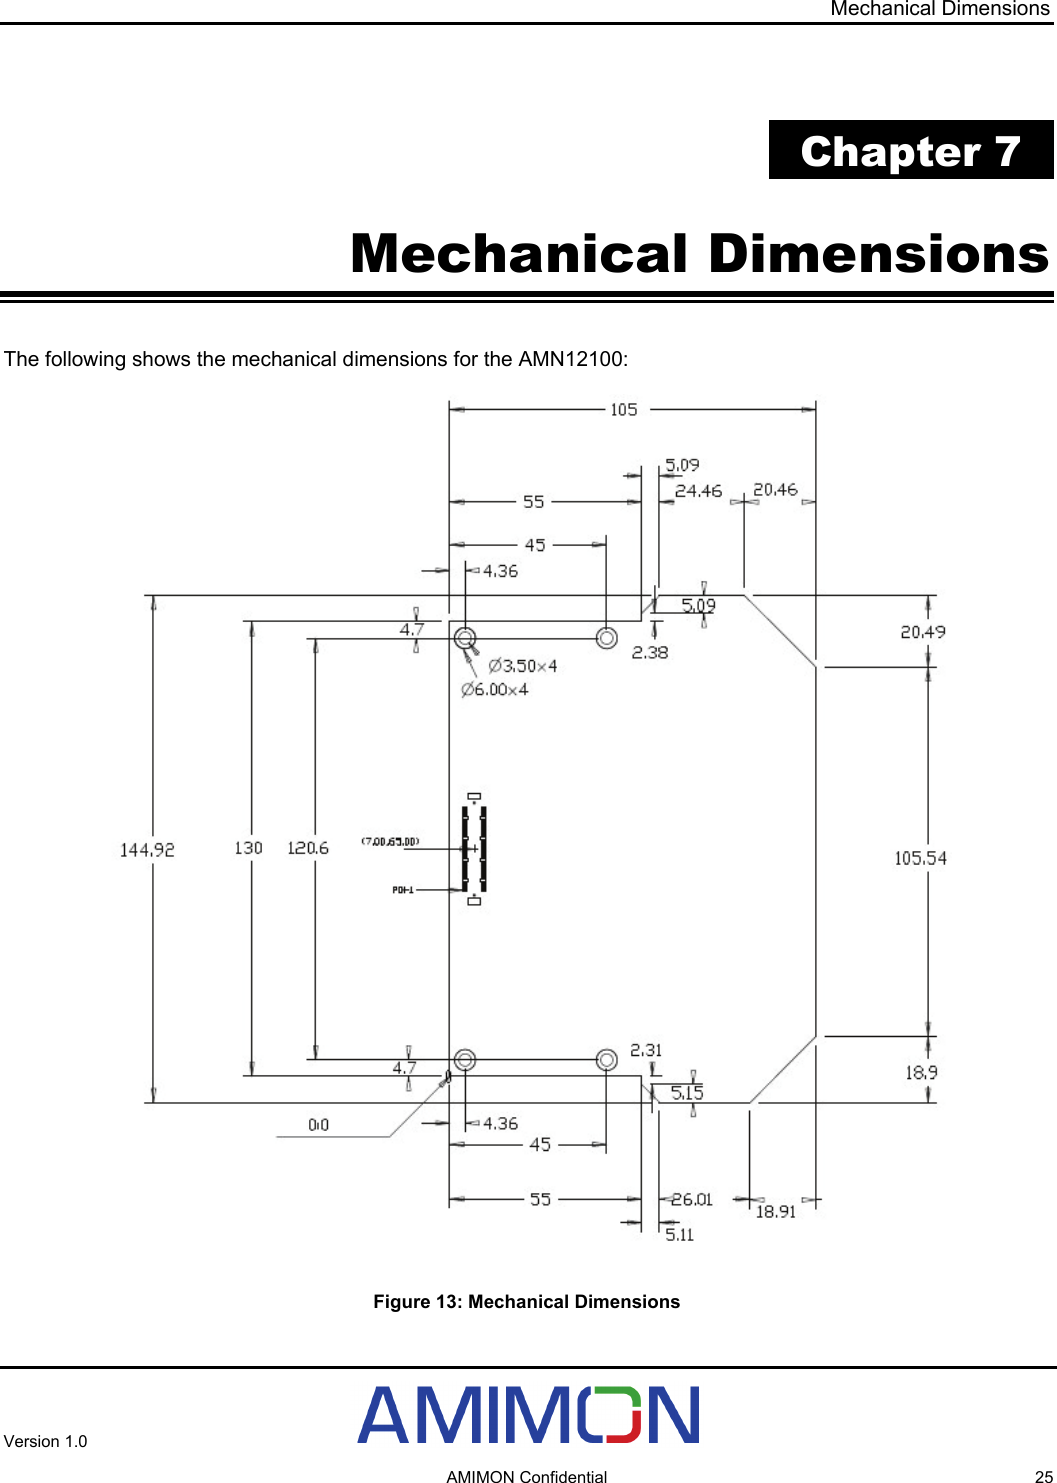 Mechanical Dimensions  Chapter 7 Mechanical Dimensions The following shows the mechanical dimensions for the AMN12100:   Figure 13: Mechanical Dimensions Version 1.0       AMIMON Confidential          25 